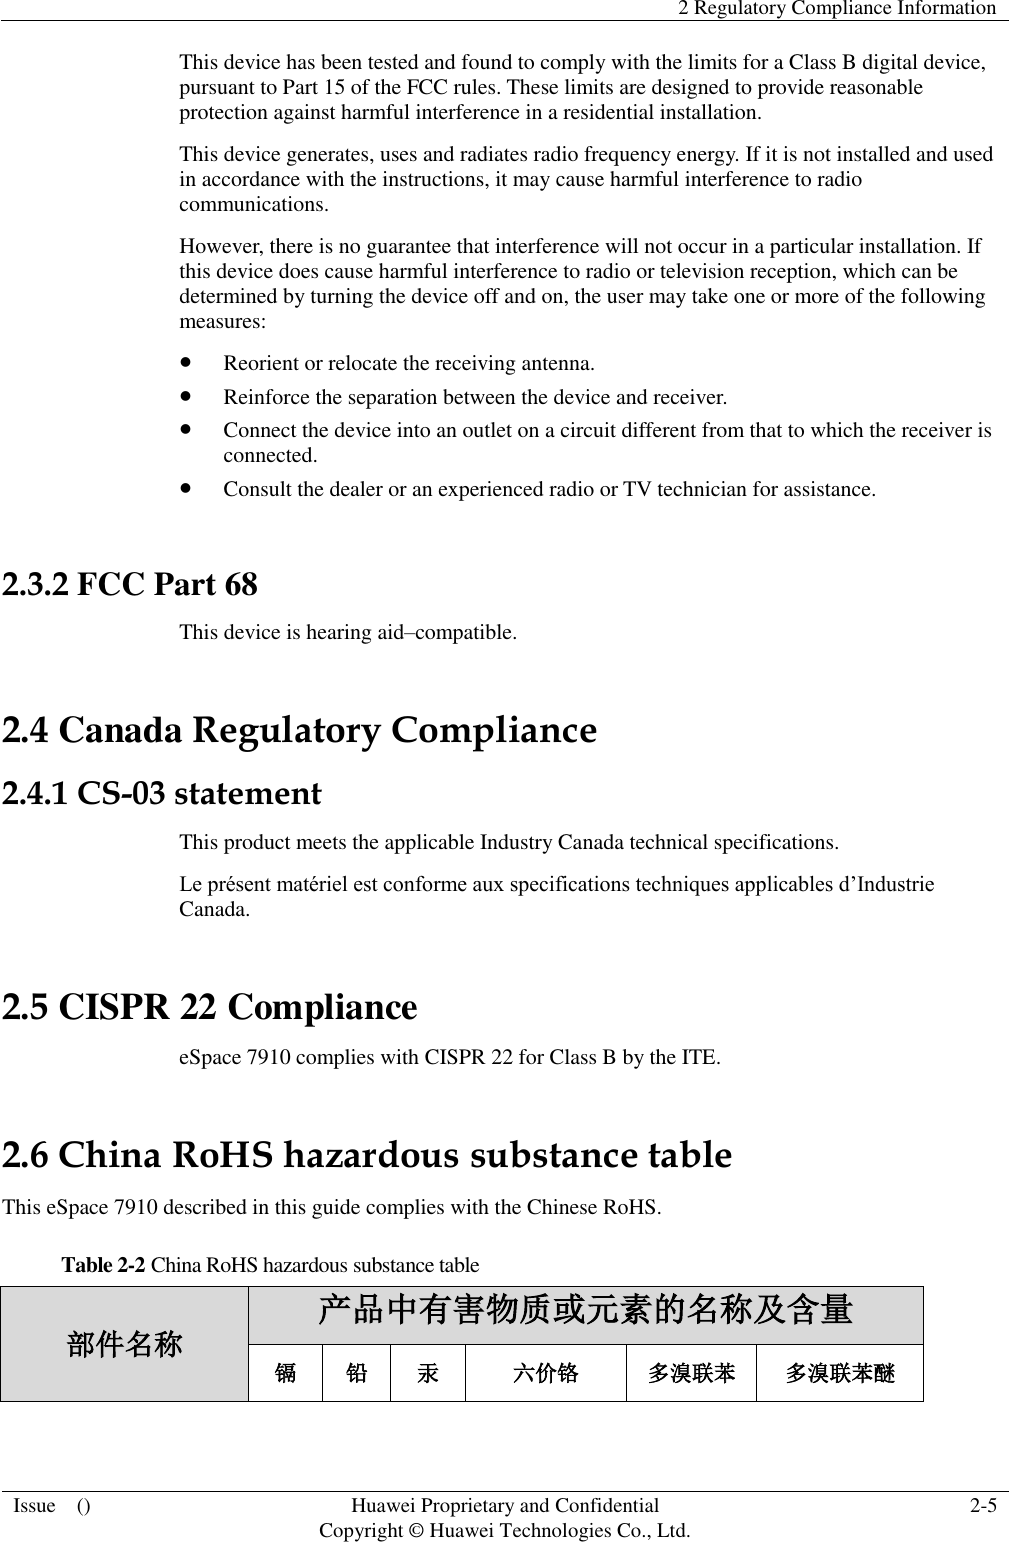   2 Regulatory Compliance Information  Issue    () Huawei Proprietary and Confidential                                     Copyright © Huawei Technologies Co., Ltd. 2-5  This device has been tested and found to comply with the limits for a Class B digital device, pursuant to Part 15 of the FCC rules. These limits are designed to provide reasonable protection against harmful interference in a residential installation. This device generates, uses and radiates radio frequency energy. If it is not installed and used in accordance with the instructions, it may cause harmful interference to radio communications. However, there is no guarantee that interference will not occur in a particular installation. If this device does cause harmful interference to radio or television reception, which can be determined by turning the device off and on, the user may take one or more of the following measures:  Reorient or relocate the receiving antenna.  Reinforce the separation between the device and receiver.  Connect the device into an outlet on a circuit different from that to which the receiver is connected.  Consult the dealer or an experienced radio or TV technician for assistance.  2.3.2 FCC Part 68 This device is hearing aid–compatible. 2.4 Canada Regulatory Compliance 2.4.1 CS-03 statement This product meets the applicable Industry Canada technical specifications.   Le présent matériel est conforme aux specifications techniques applicables d’Industrie Canada. 2.5 CISPR 22 Compliance eSpace 7910 complies with CISPR 22 for Class B by the ITE. 2.6 China RoHS hazardous substance table This eSpace 7910 described in this guide complies with the Chinese RoHS. Table 2-2 China RoHS hazardous substance table 部件名称 产品中有害物质或元素的名称及含量 镉 铅 汞 六价铬 多溴联苯 多溴联苯醚 